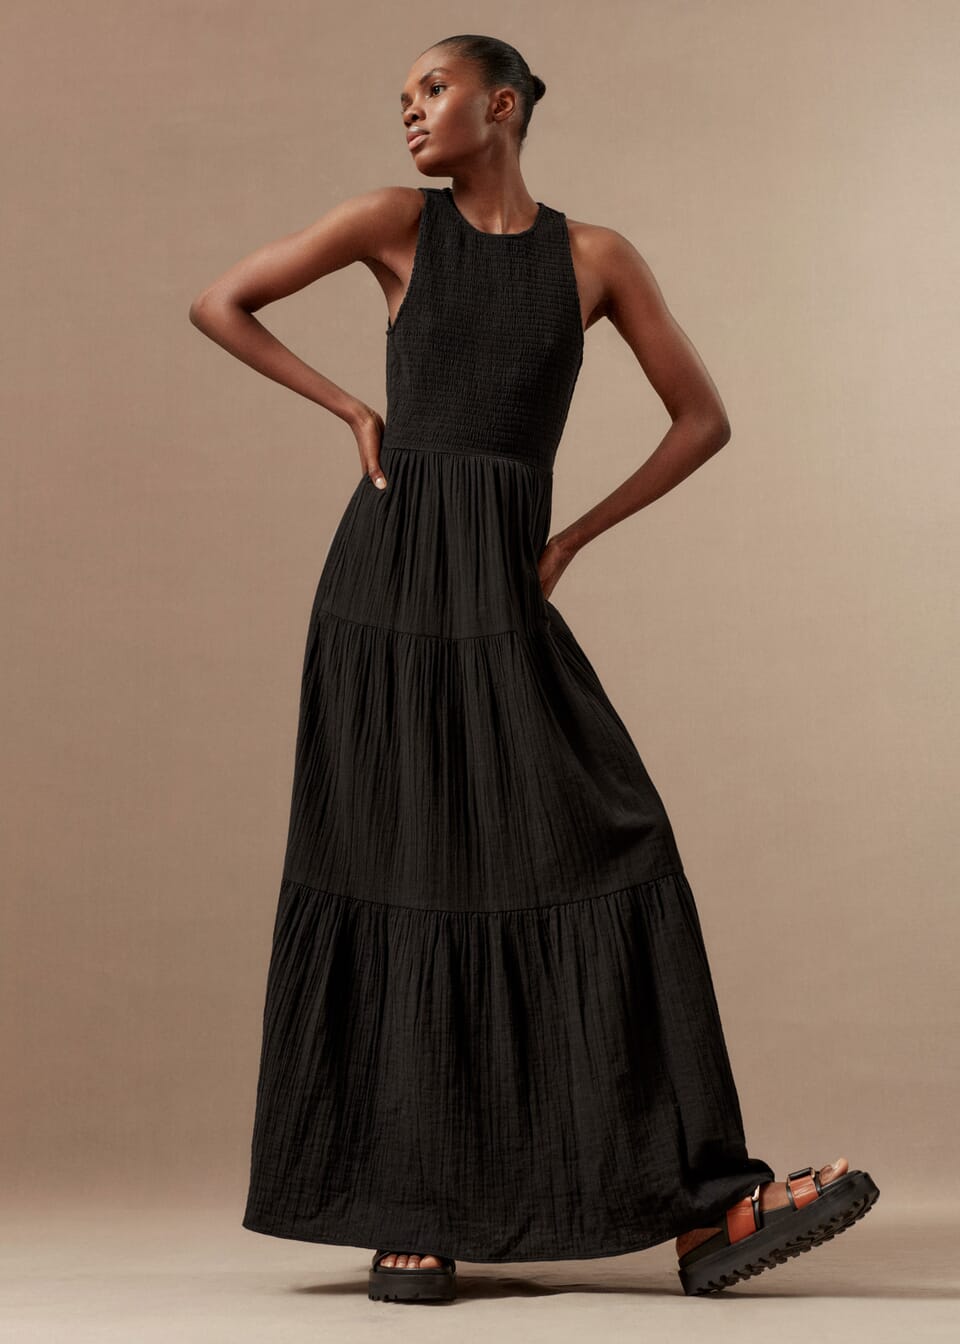 Black summer dresses are the versatile and easy way to get dressed on hot summer days! A classic, clean-cut staple that forms the basis of day and dusk outfitting, this Me + Em black maxi dress is crafted from cheesecloth in a versatile black hue and heroes a flattering halterneck silhouette.